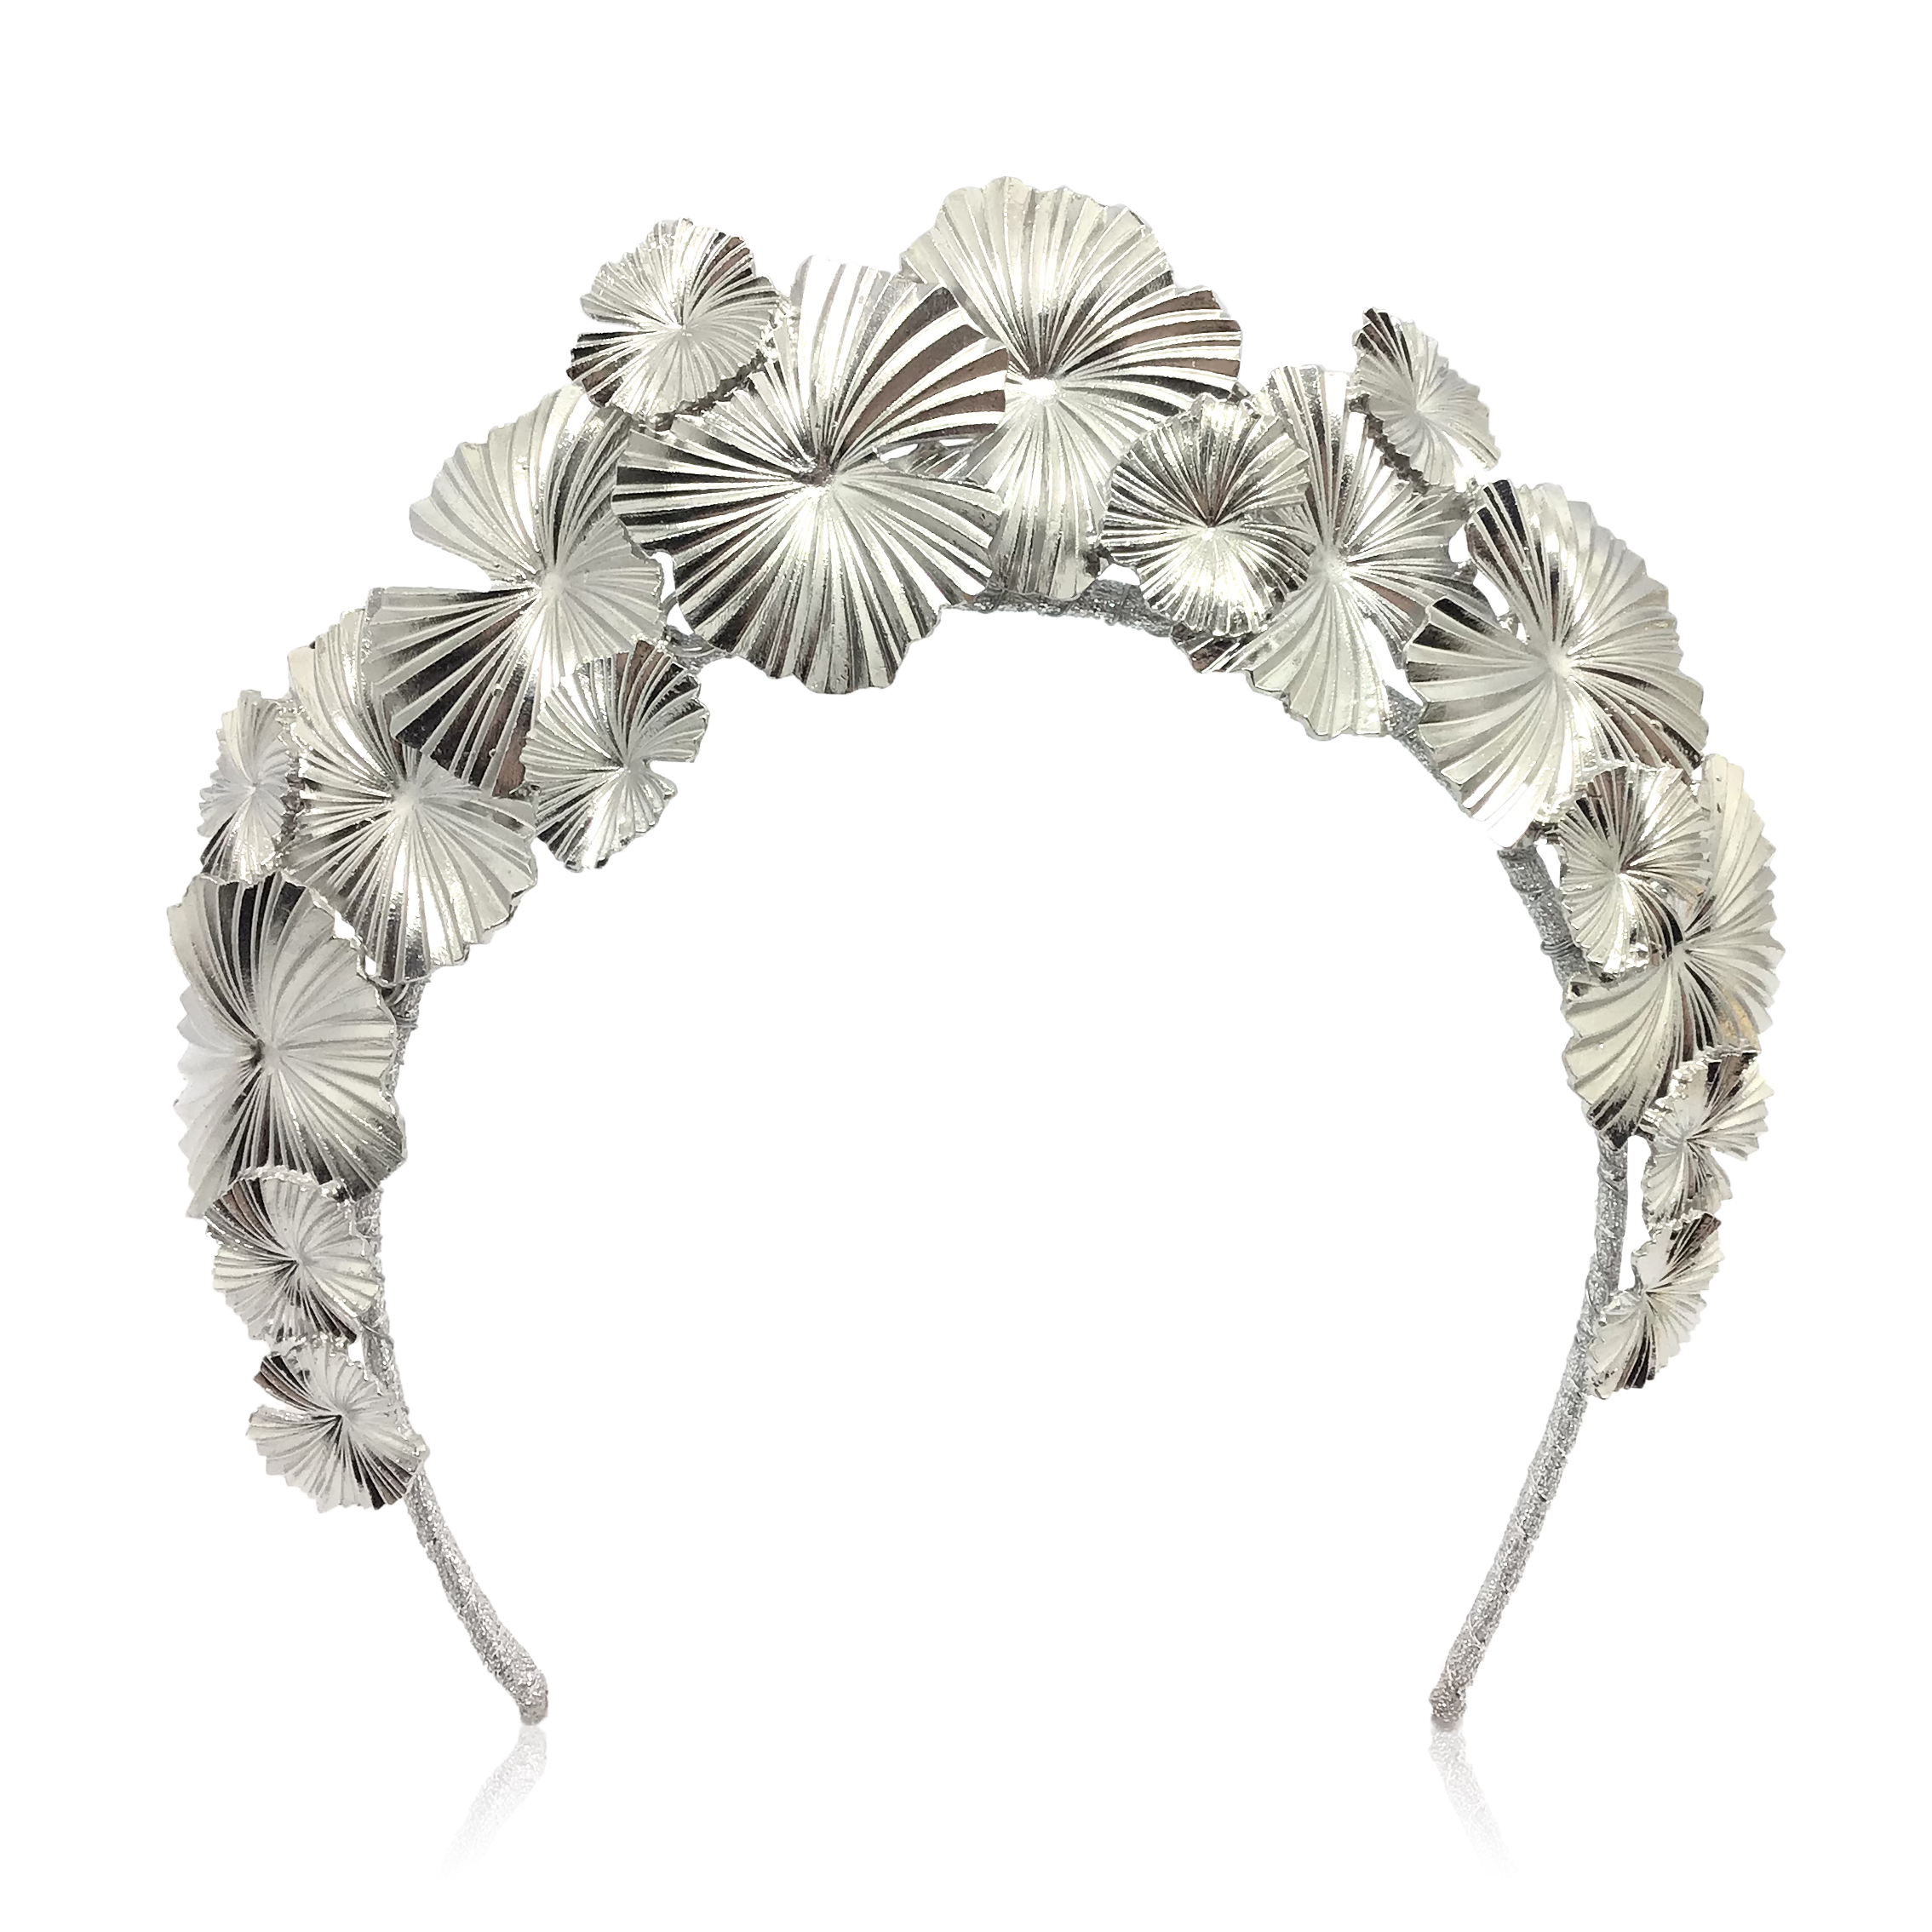 Silver Flower Hair Accessories|Cade|Jeanette Maree|